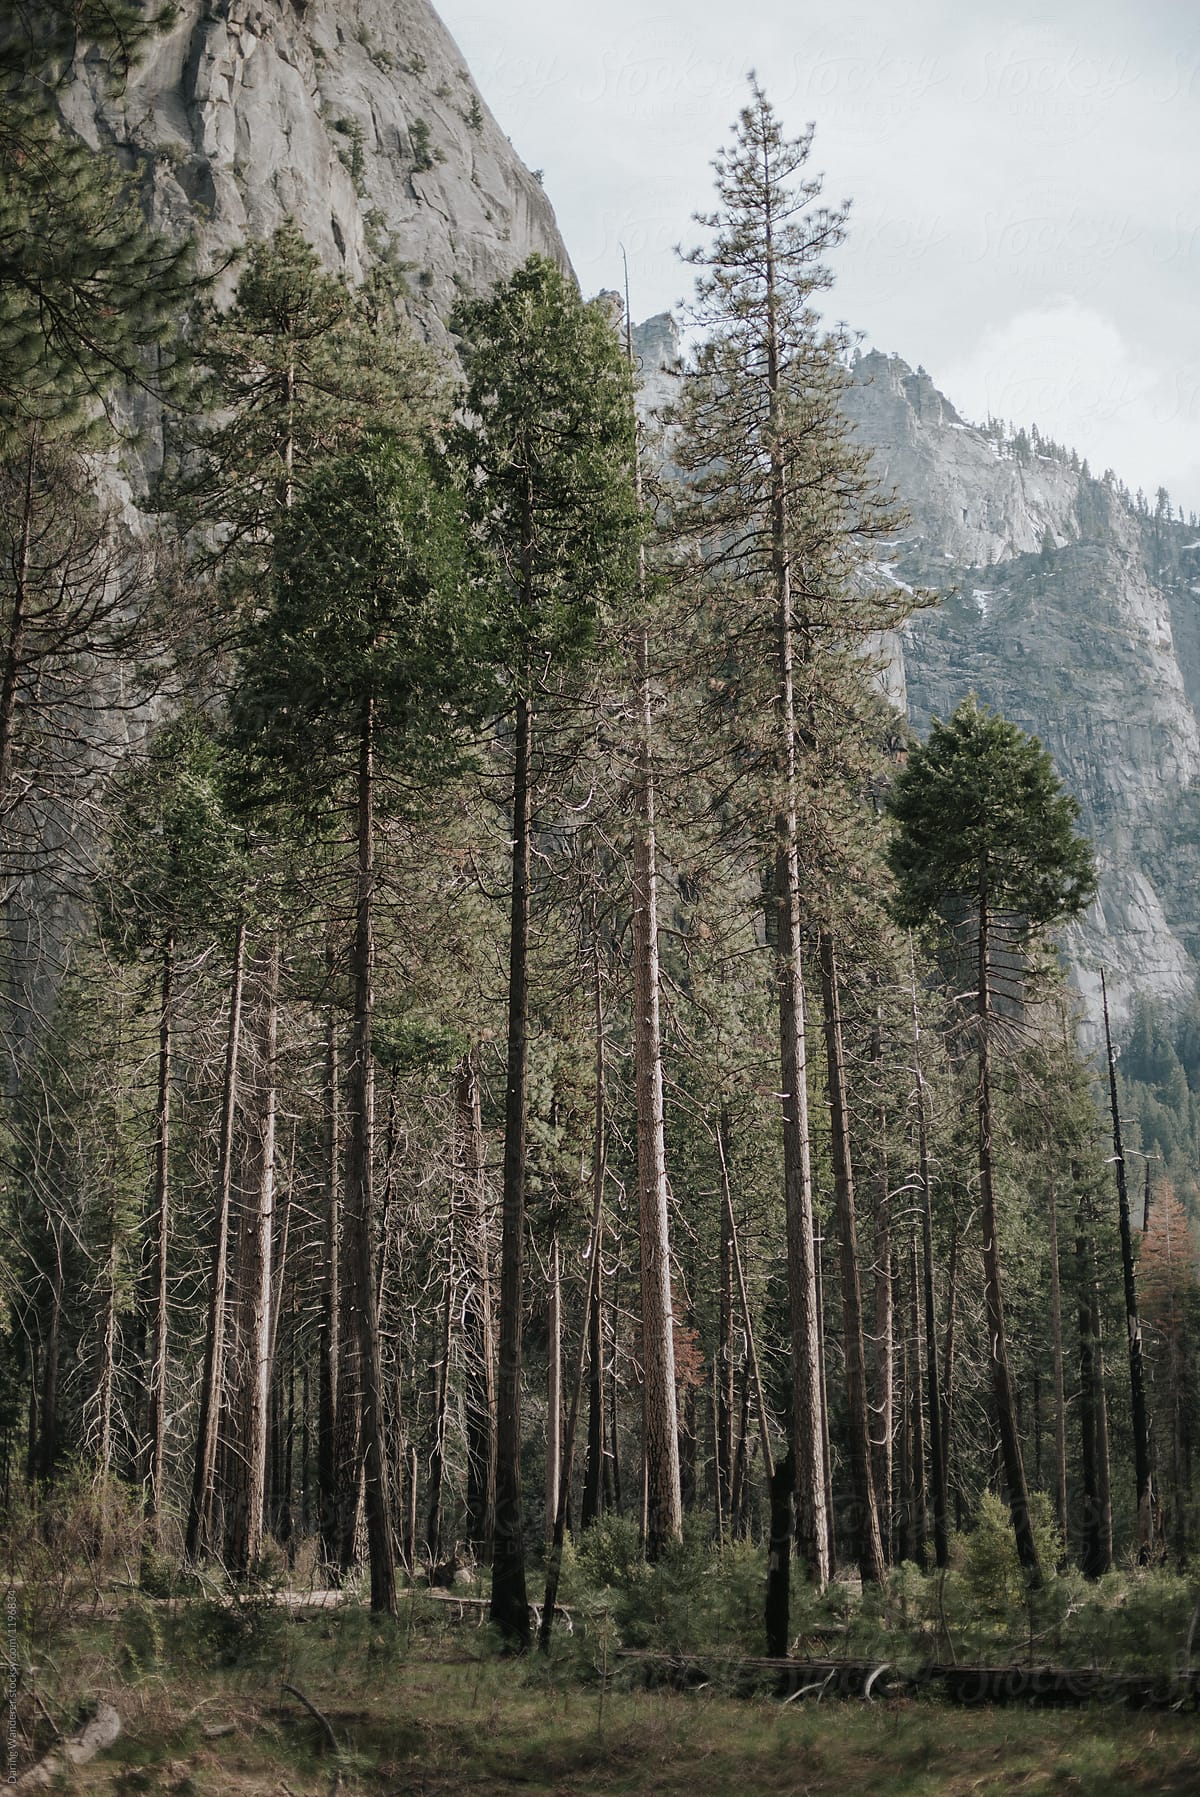 Forest pine trees in Yosemite Valley